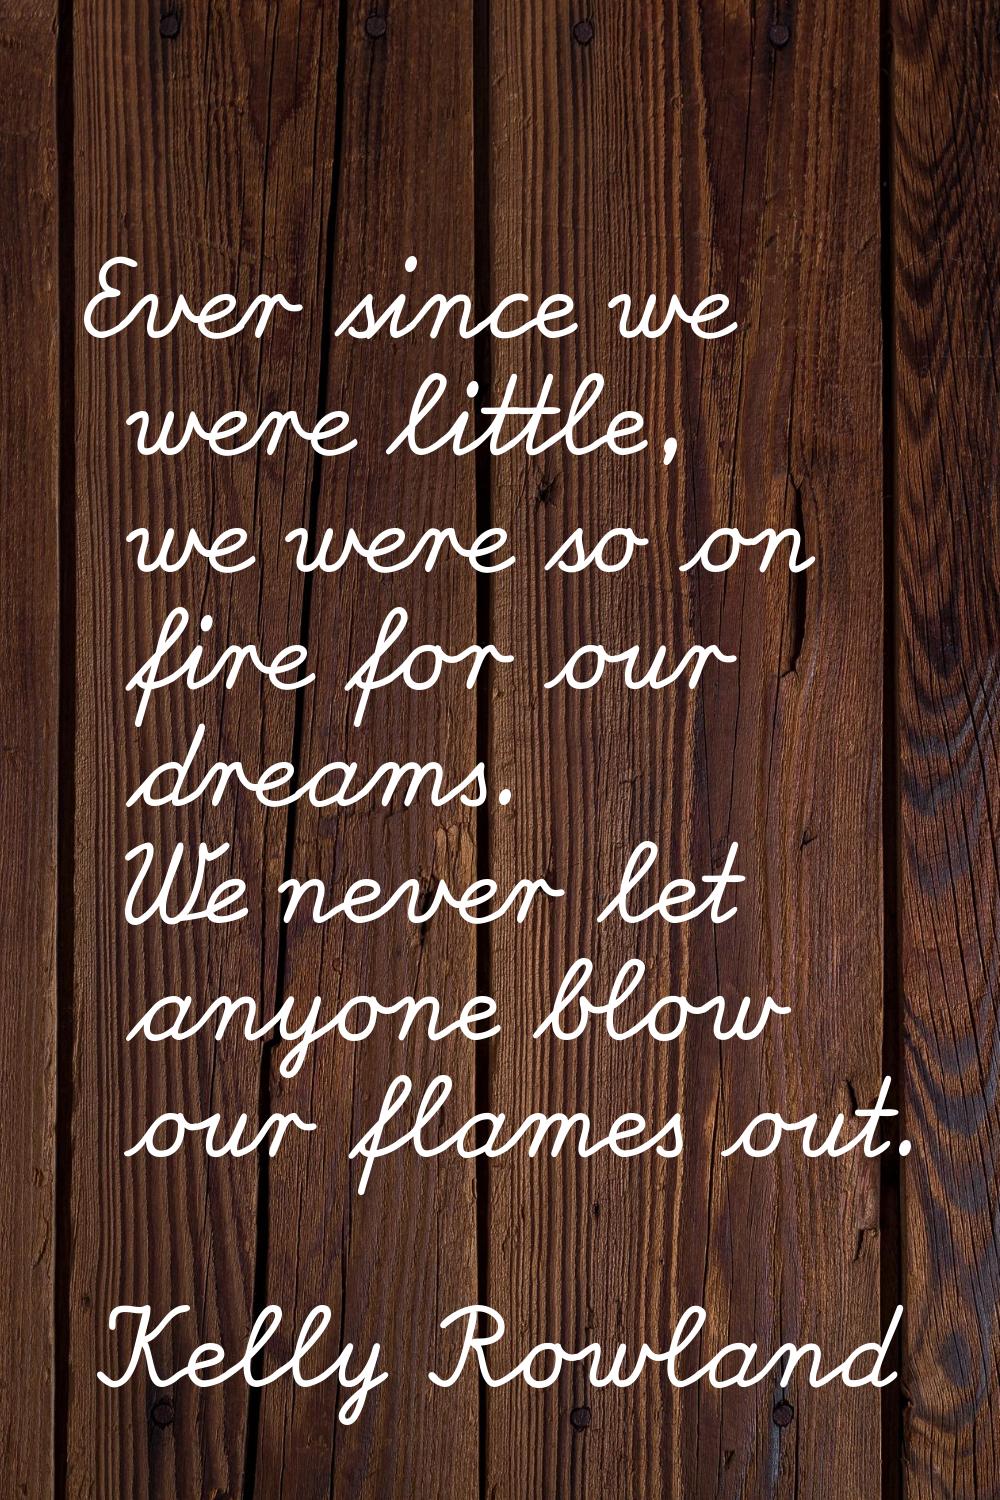 Ever since we were little, we were so on fire for our dreams. We never let anyone blow our flames o